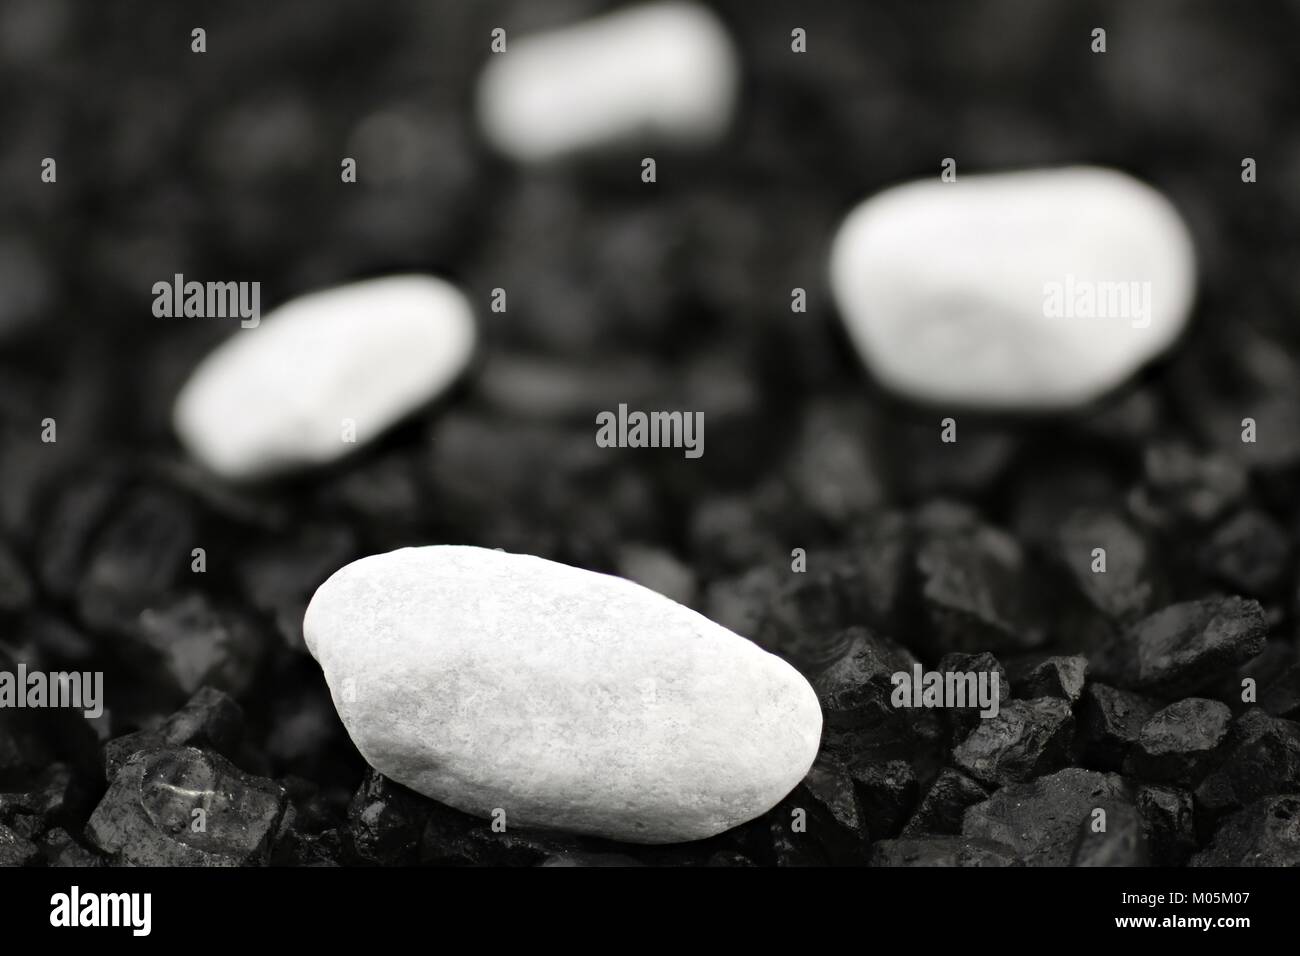 White pebbles in front of black background with black grit Stock Photo